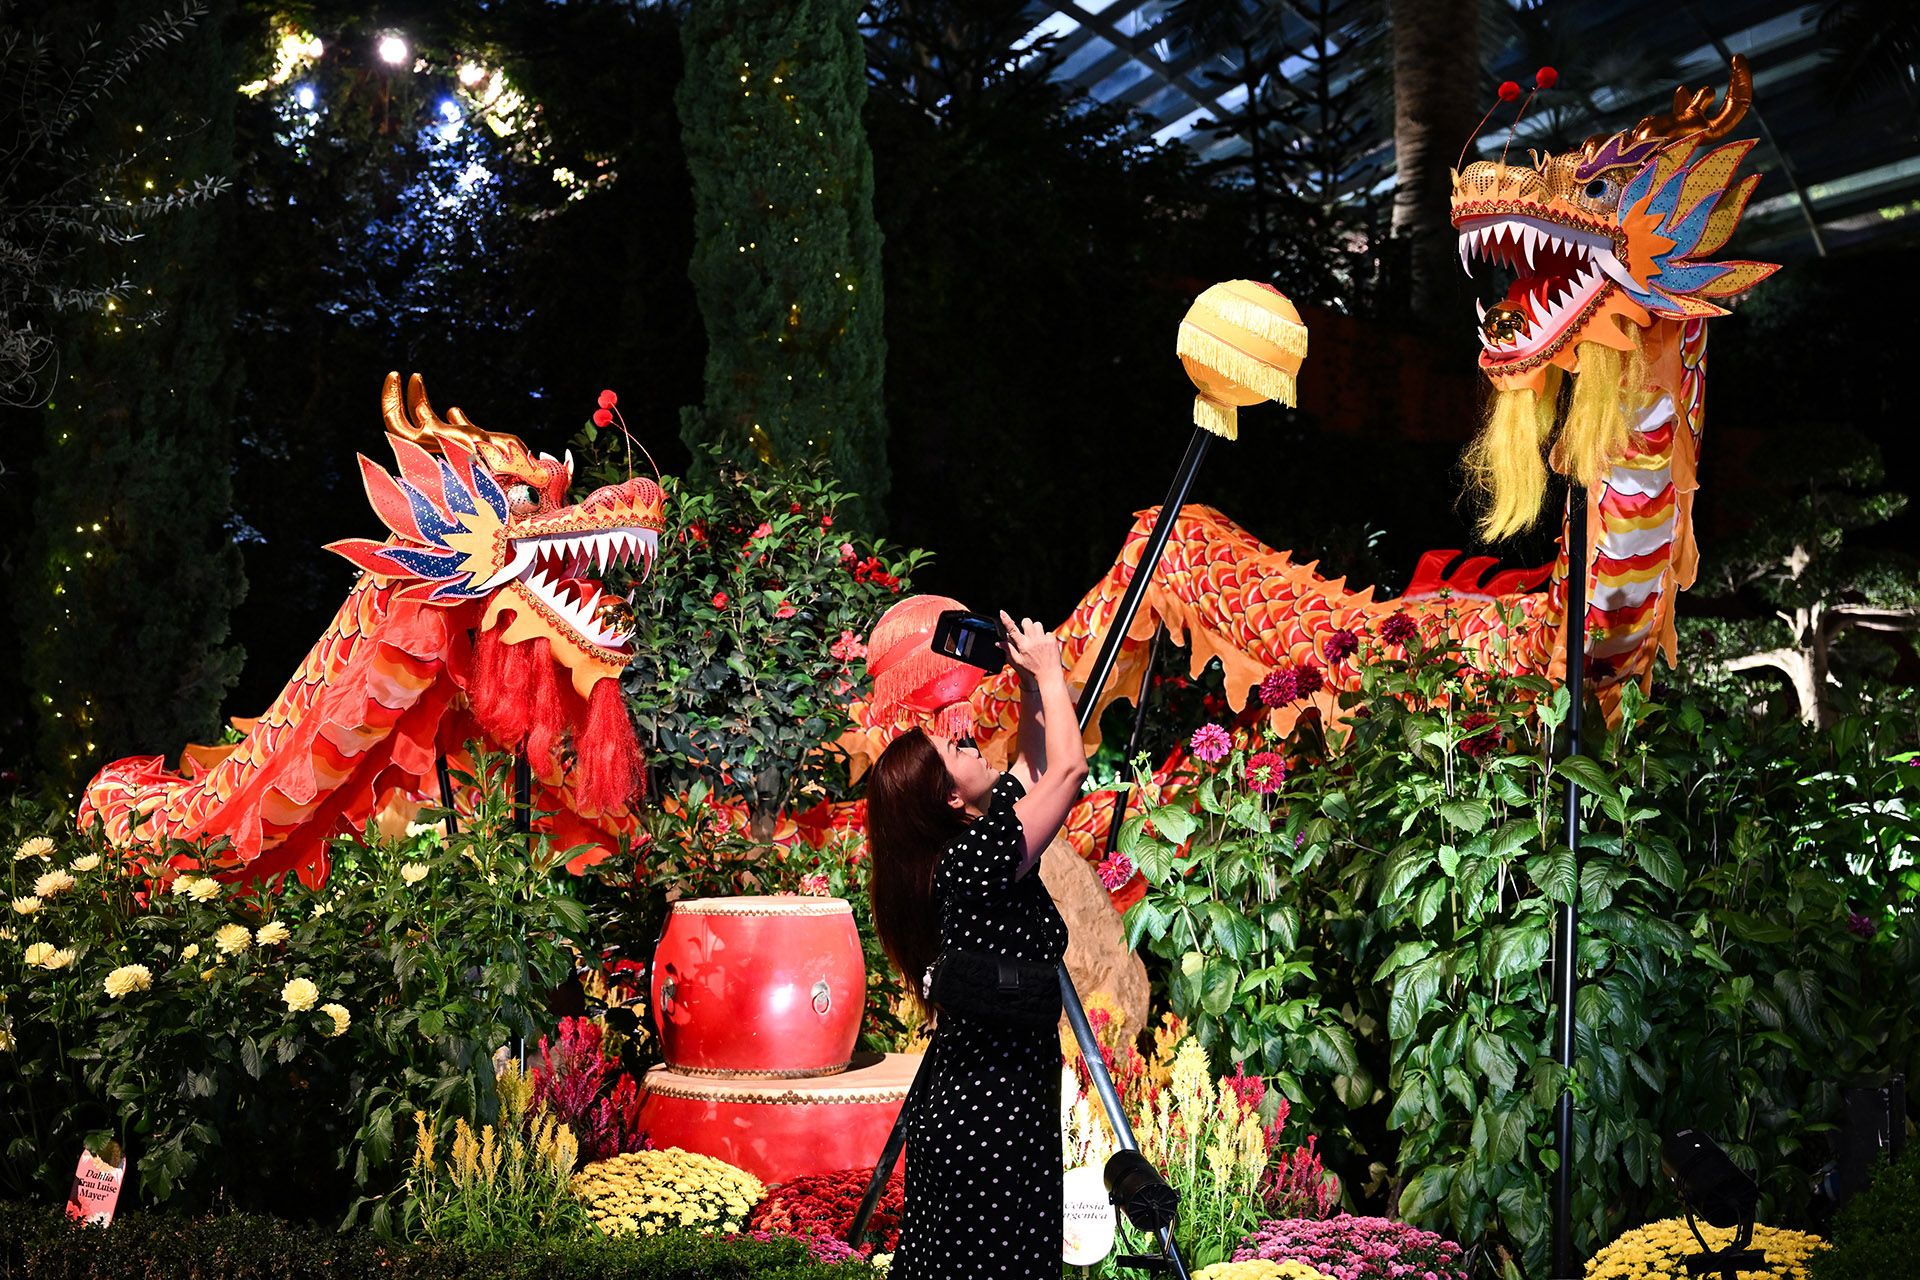 Madam Cynthia Go, 47, snapping shots of a pair of dragons resembling those used in traditional dragon dance, part of the Dahlia Dreams floral display that opened on Jan 19. ST PHOTO: LIM YAOHUI